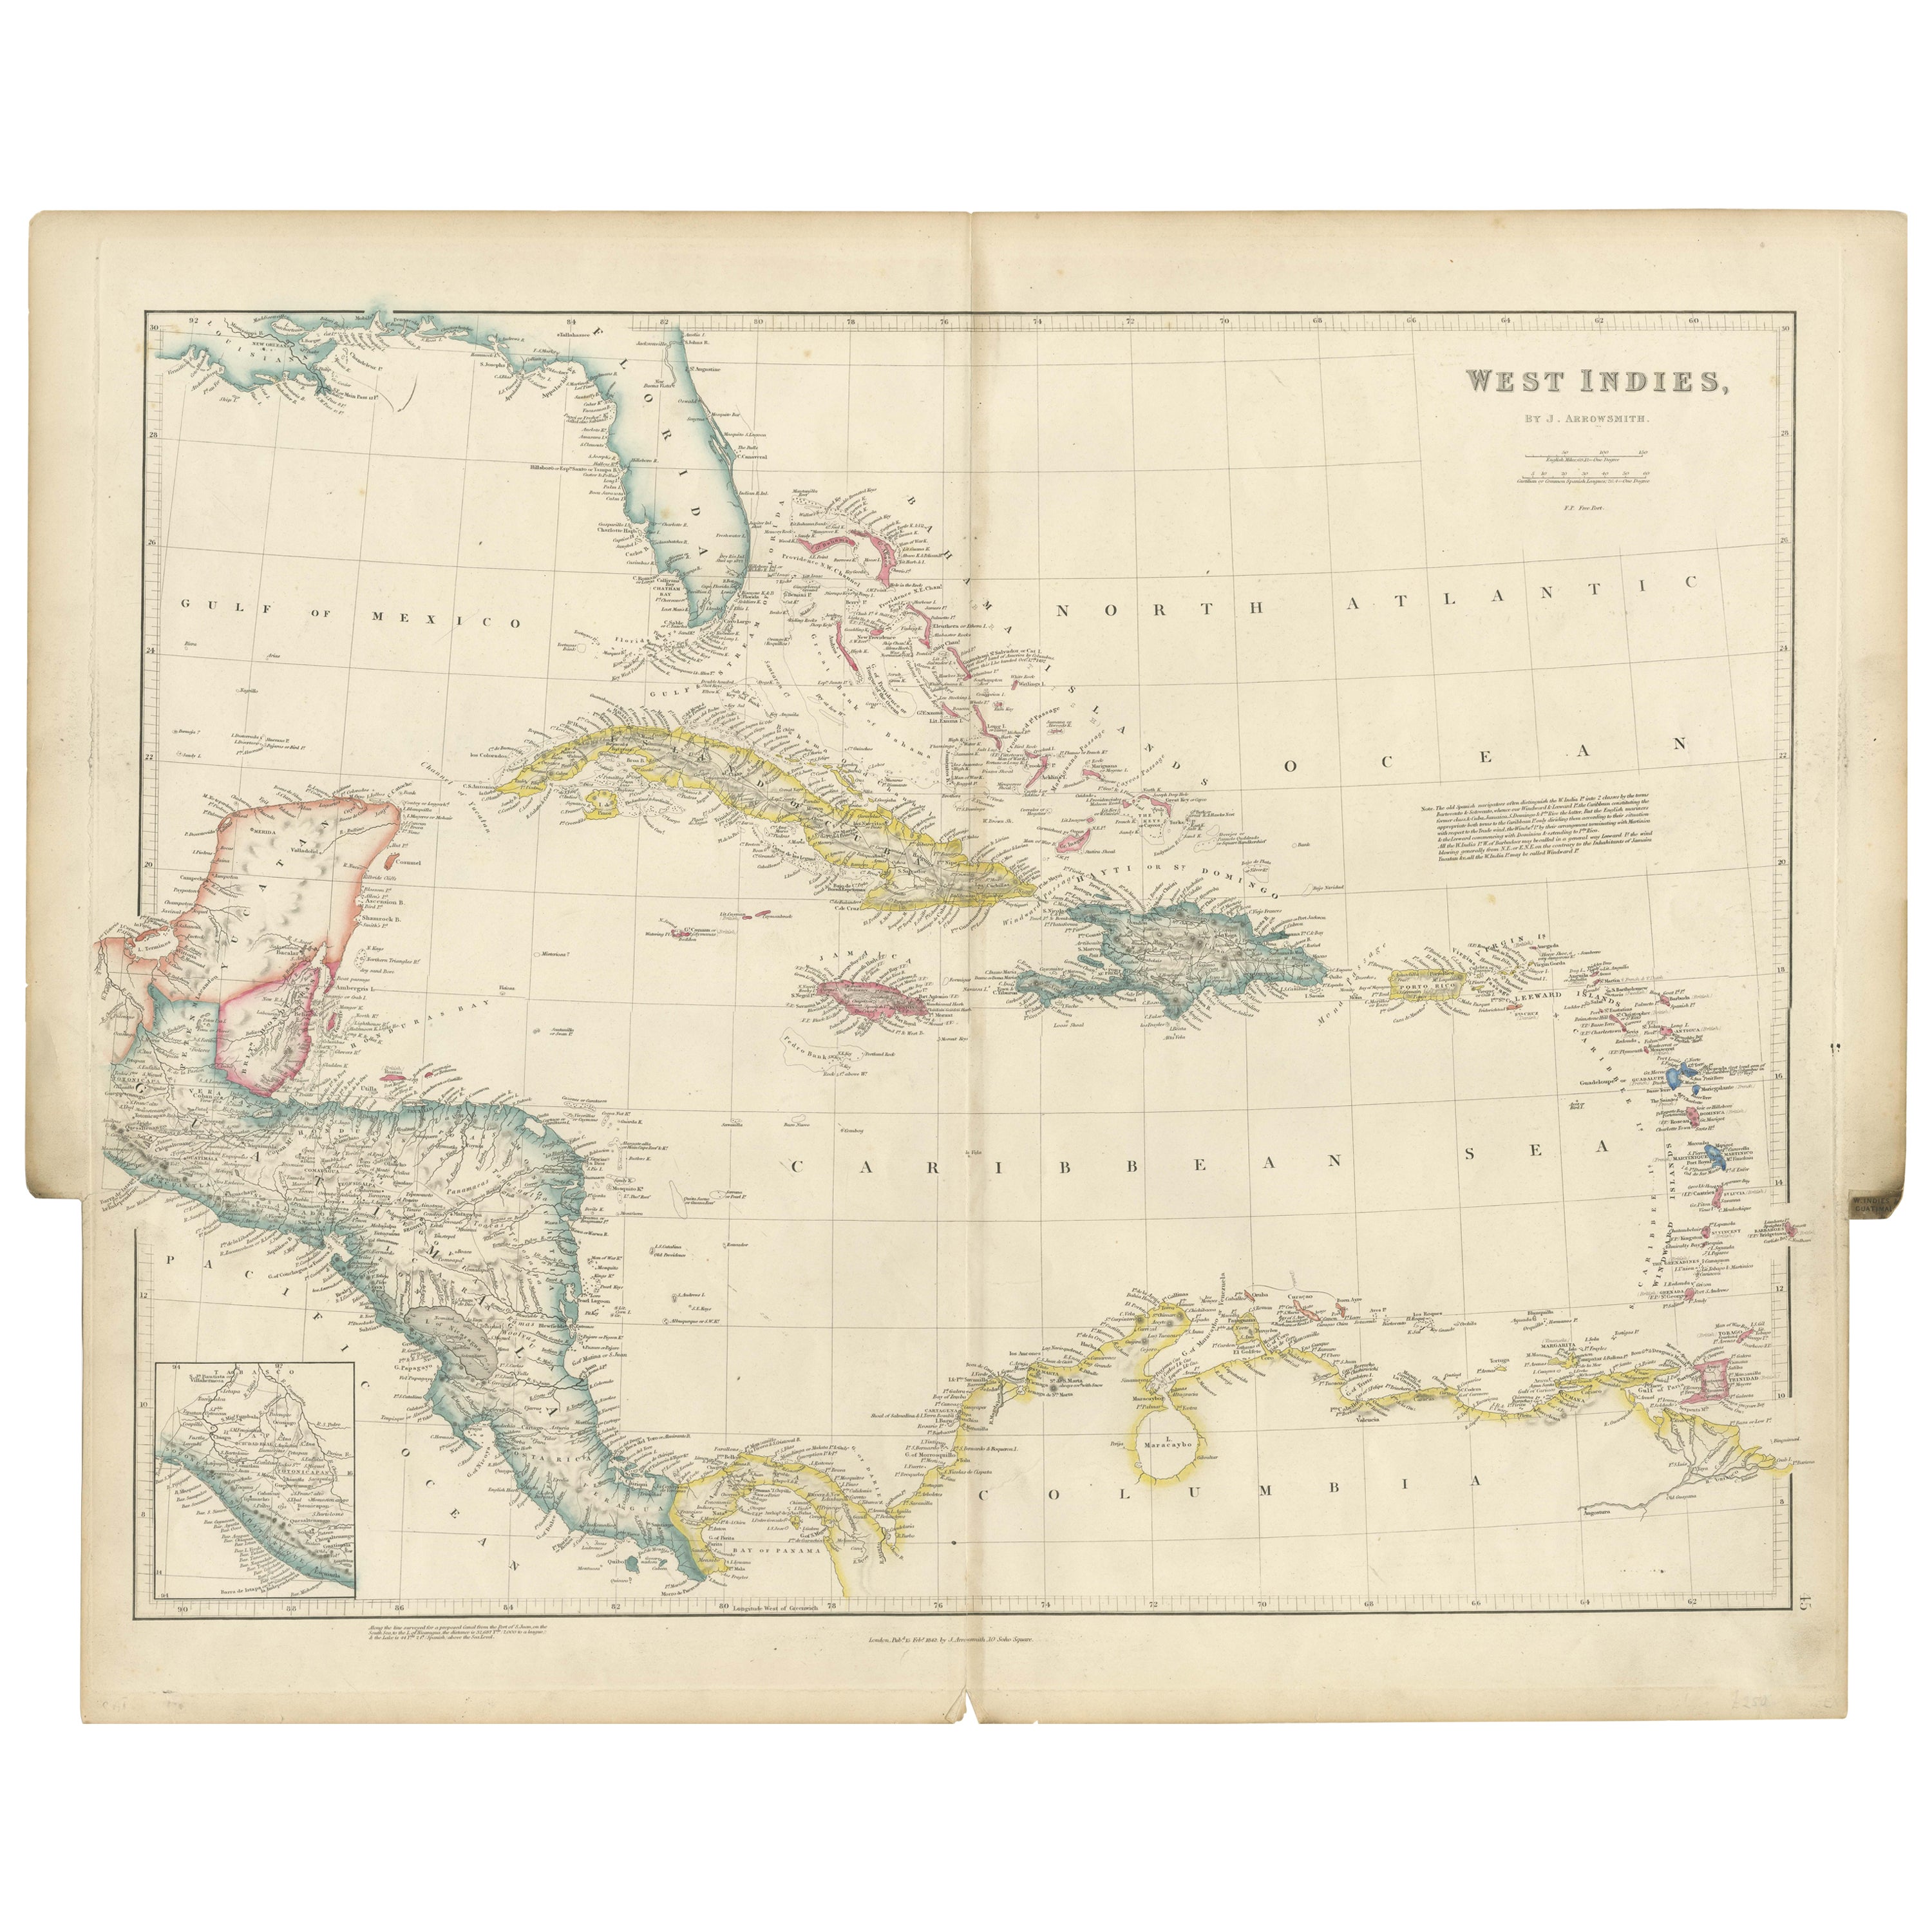 Original Antique Map of the West Indies by J. Arrowsmith, 1842